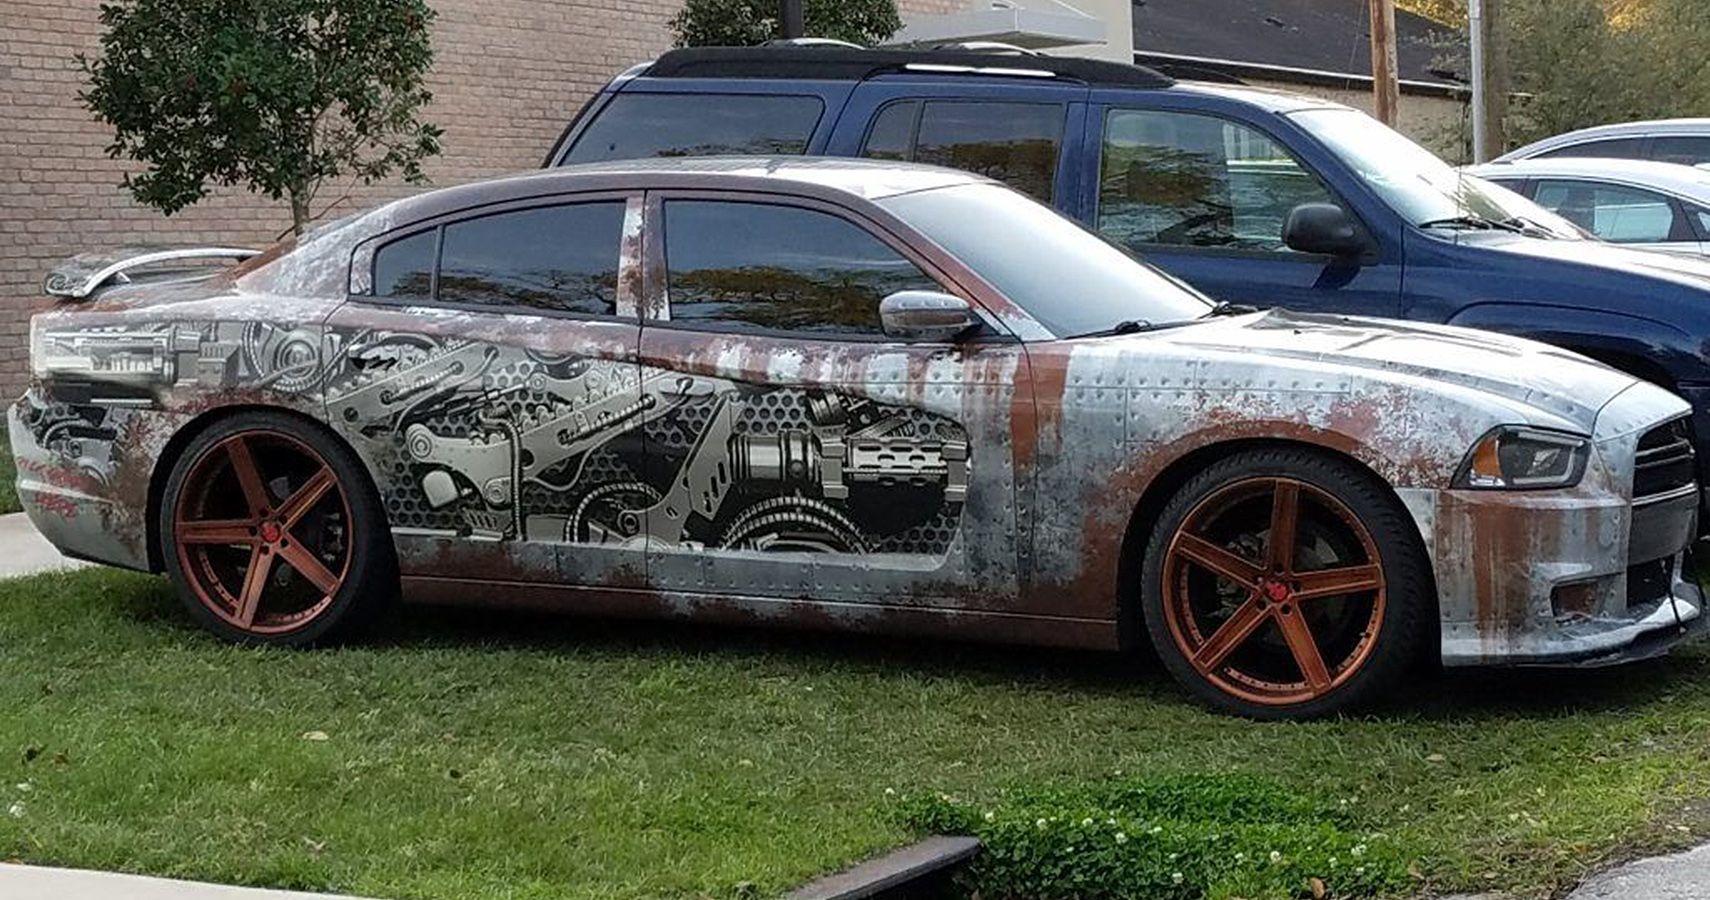 The “Terminator” Dodge Charger